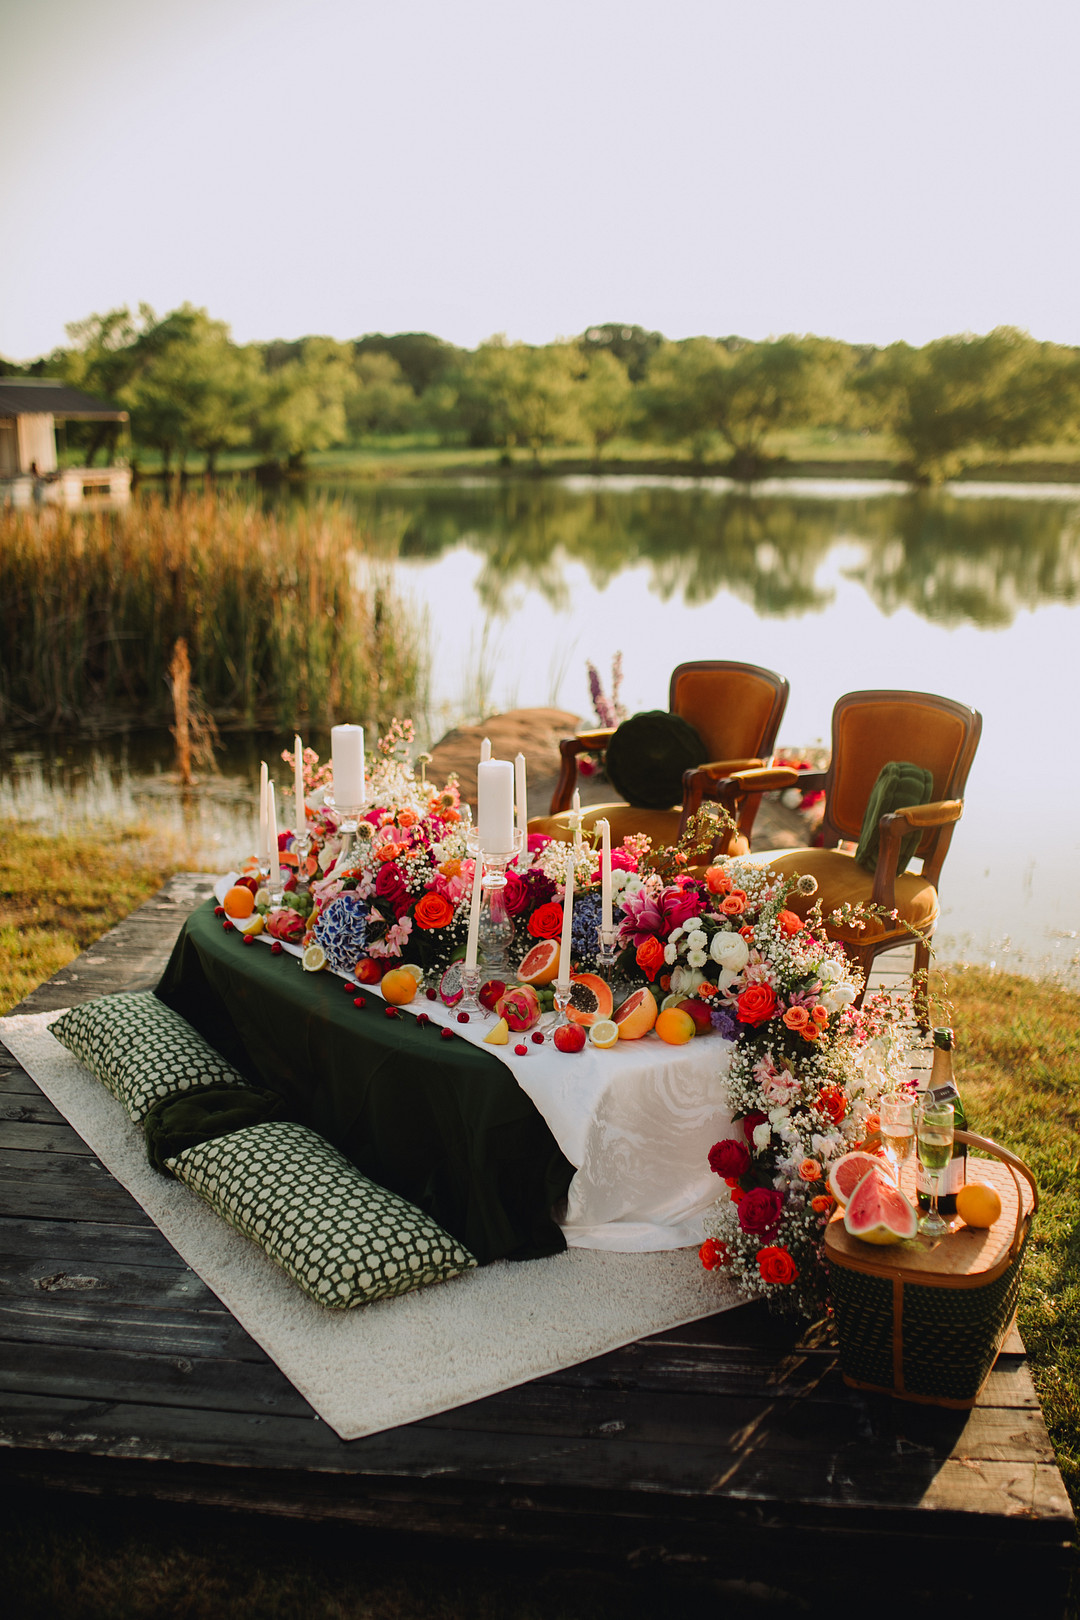 Small sweetheart table with overflow of flows and centerpieces beside a lake